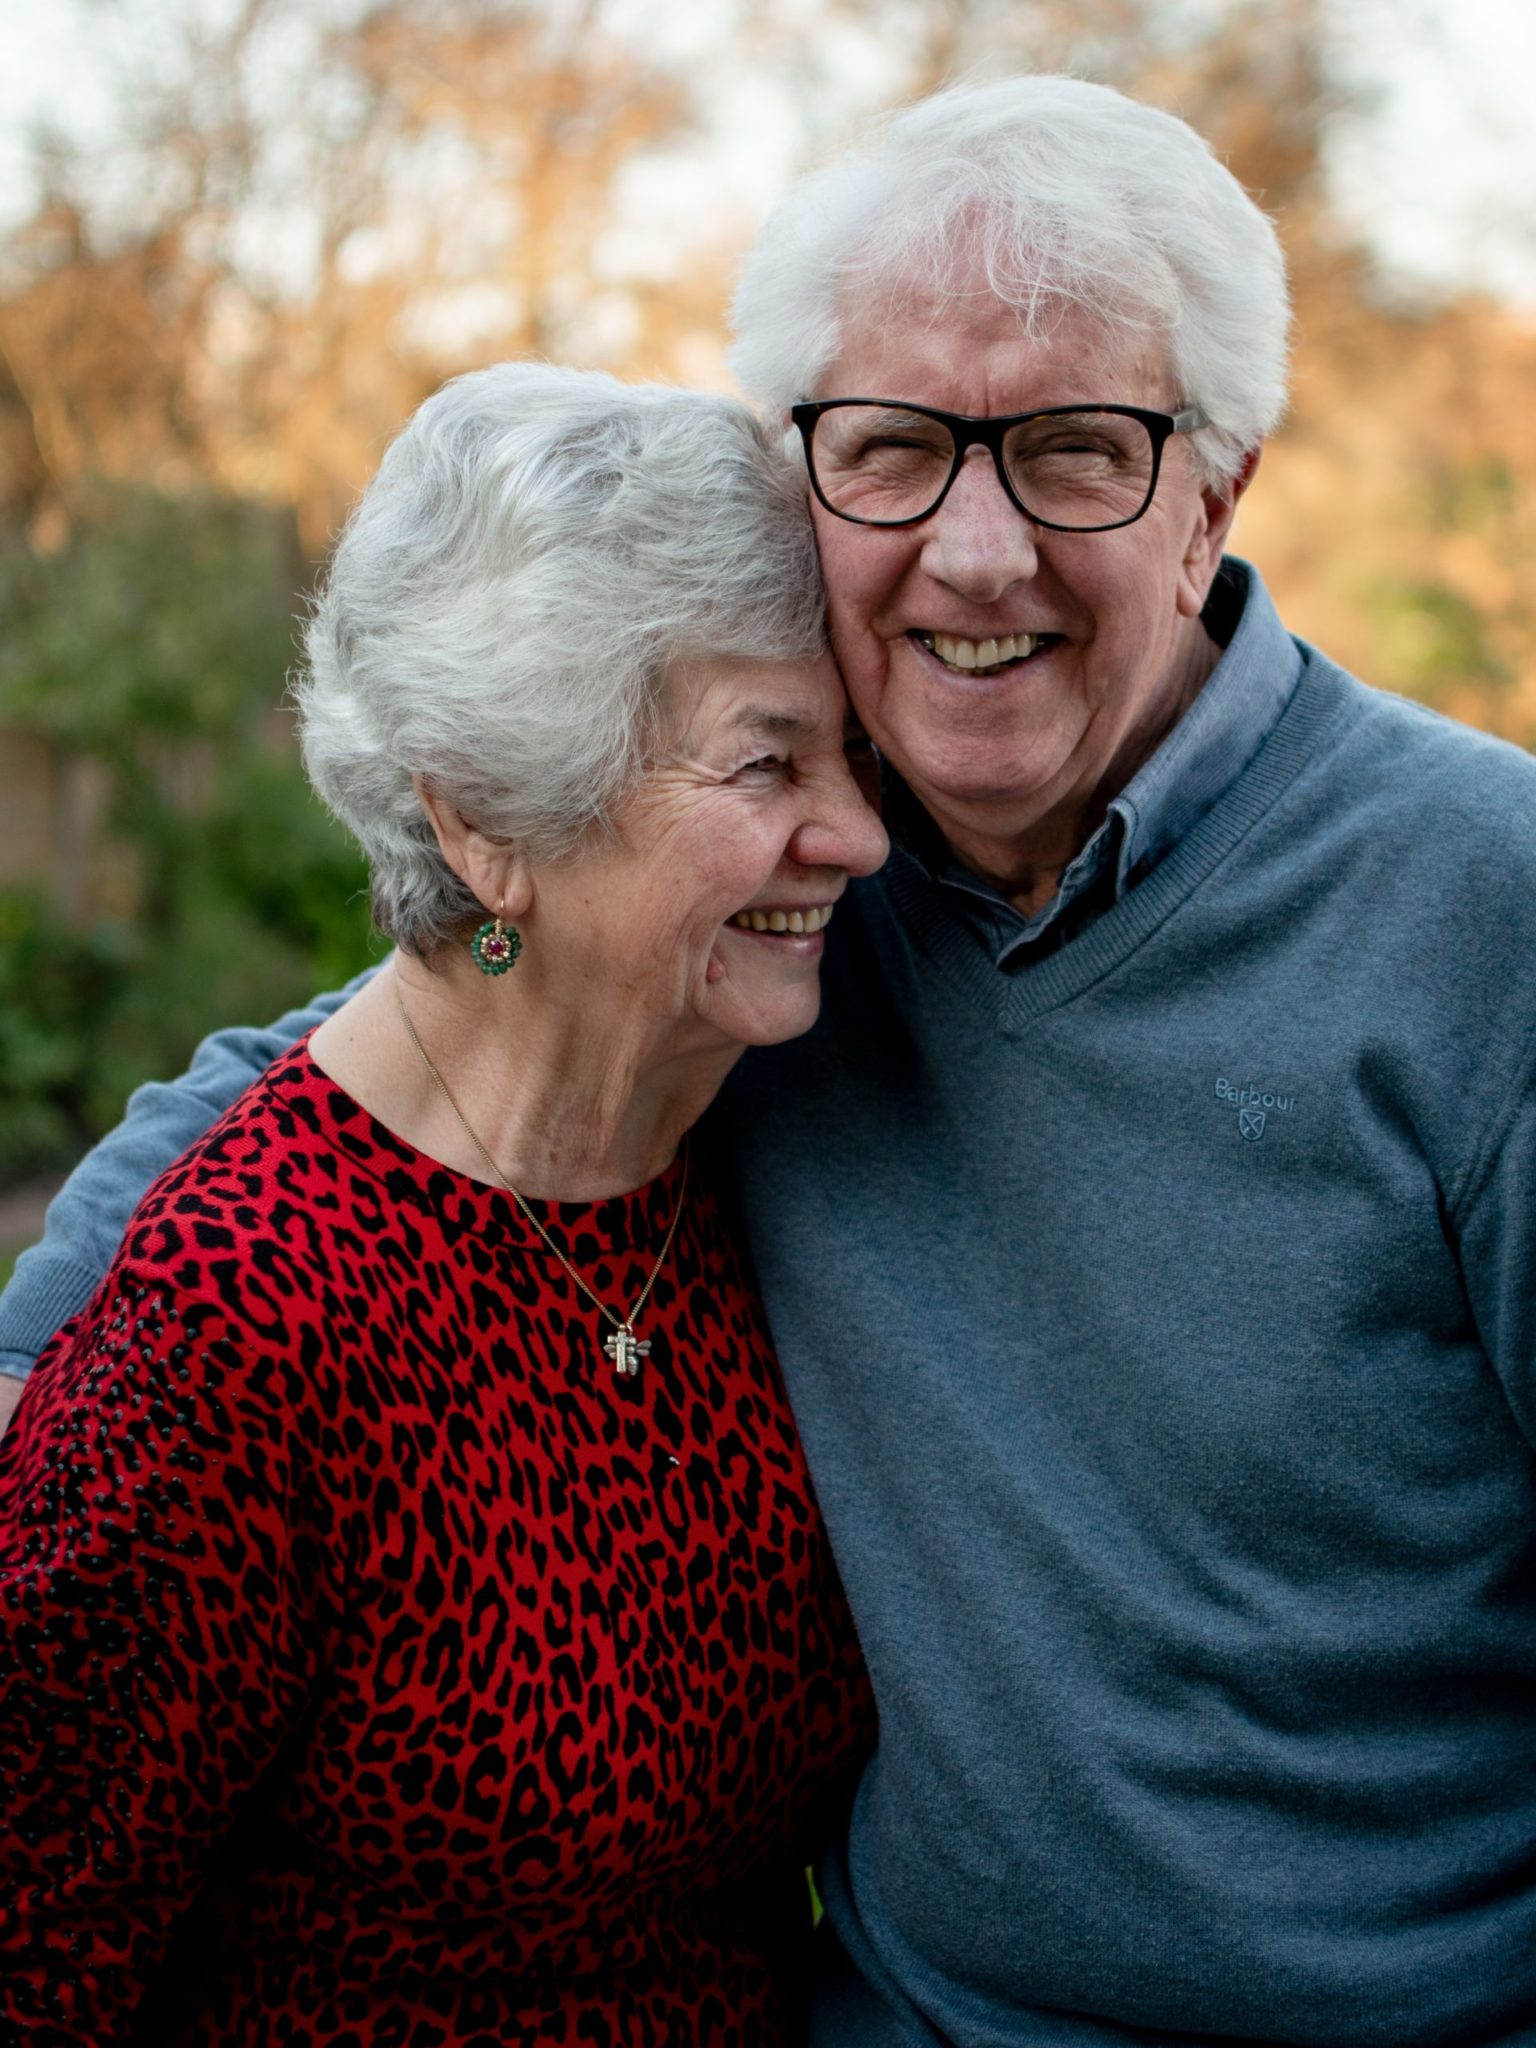 An elderly couple smiling and embracing